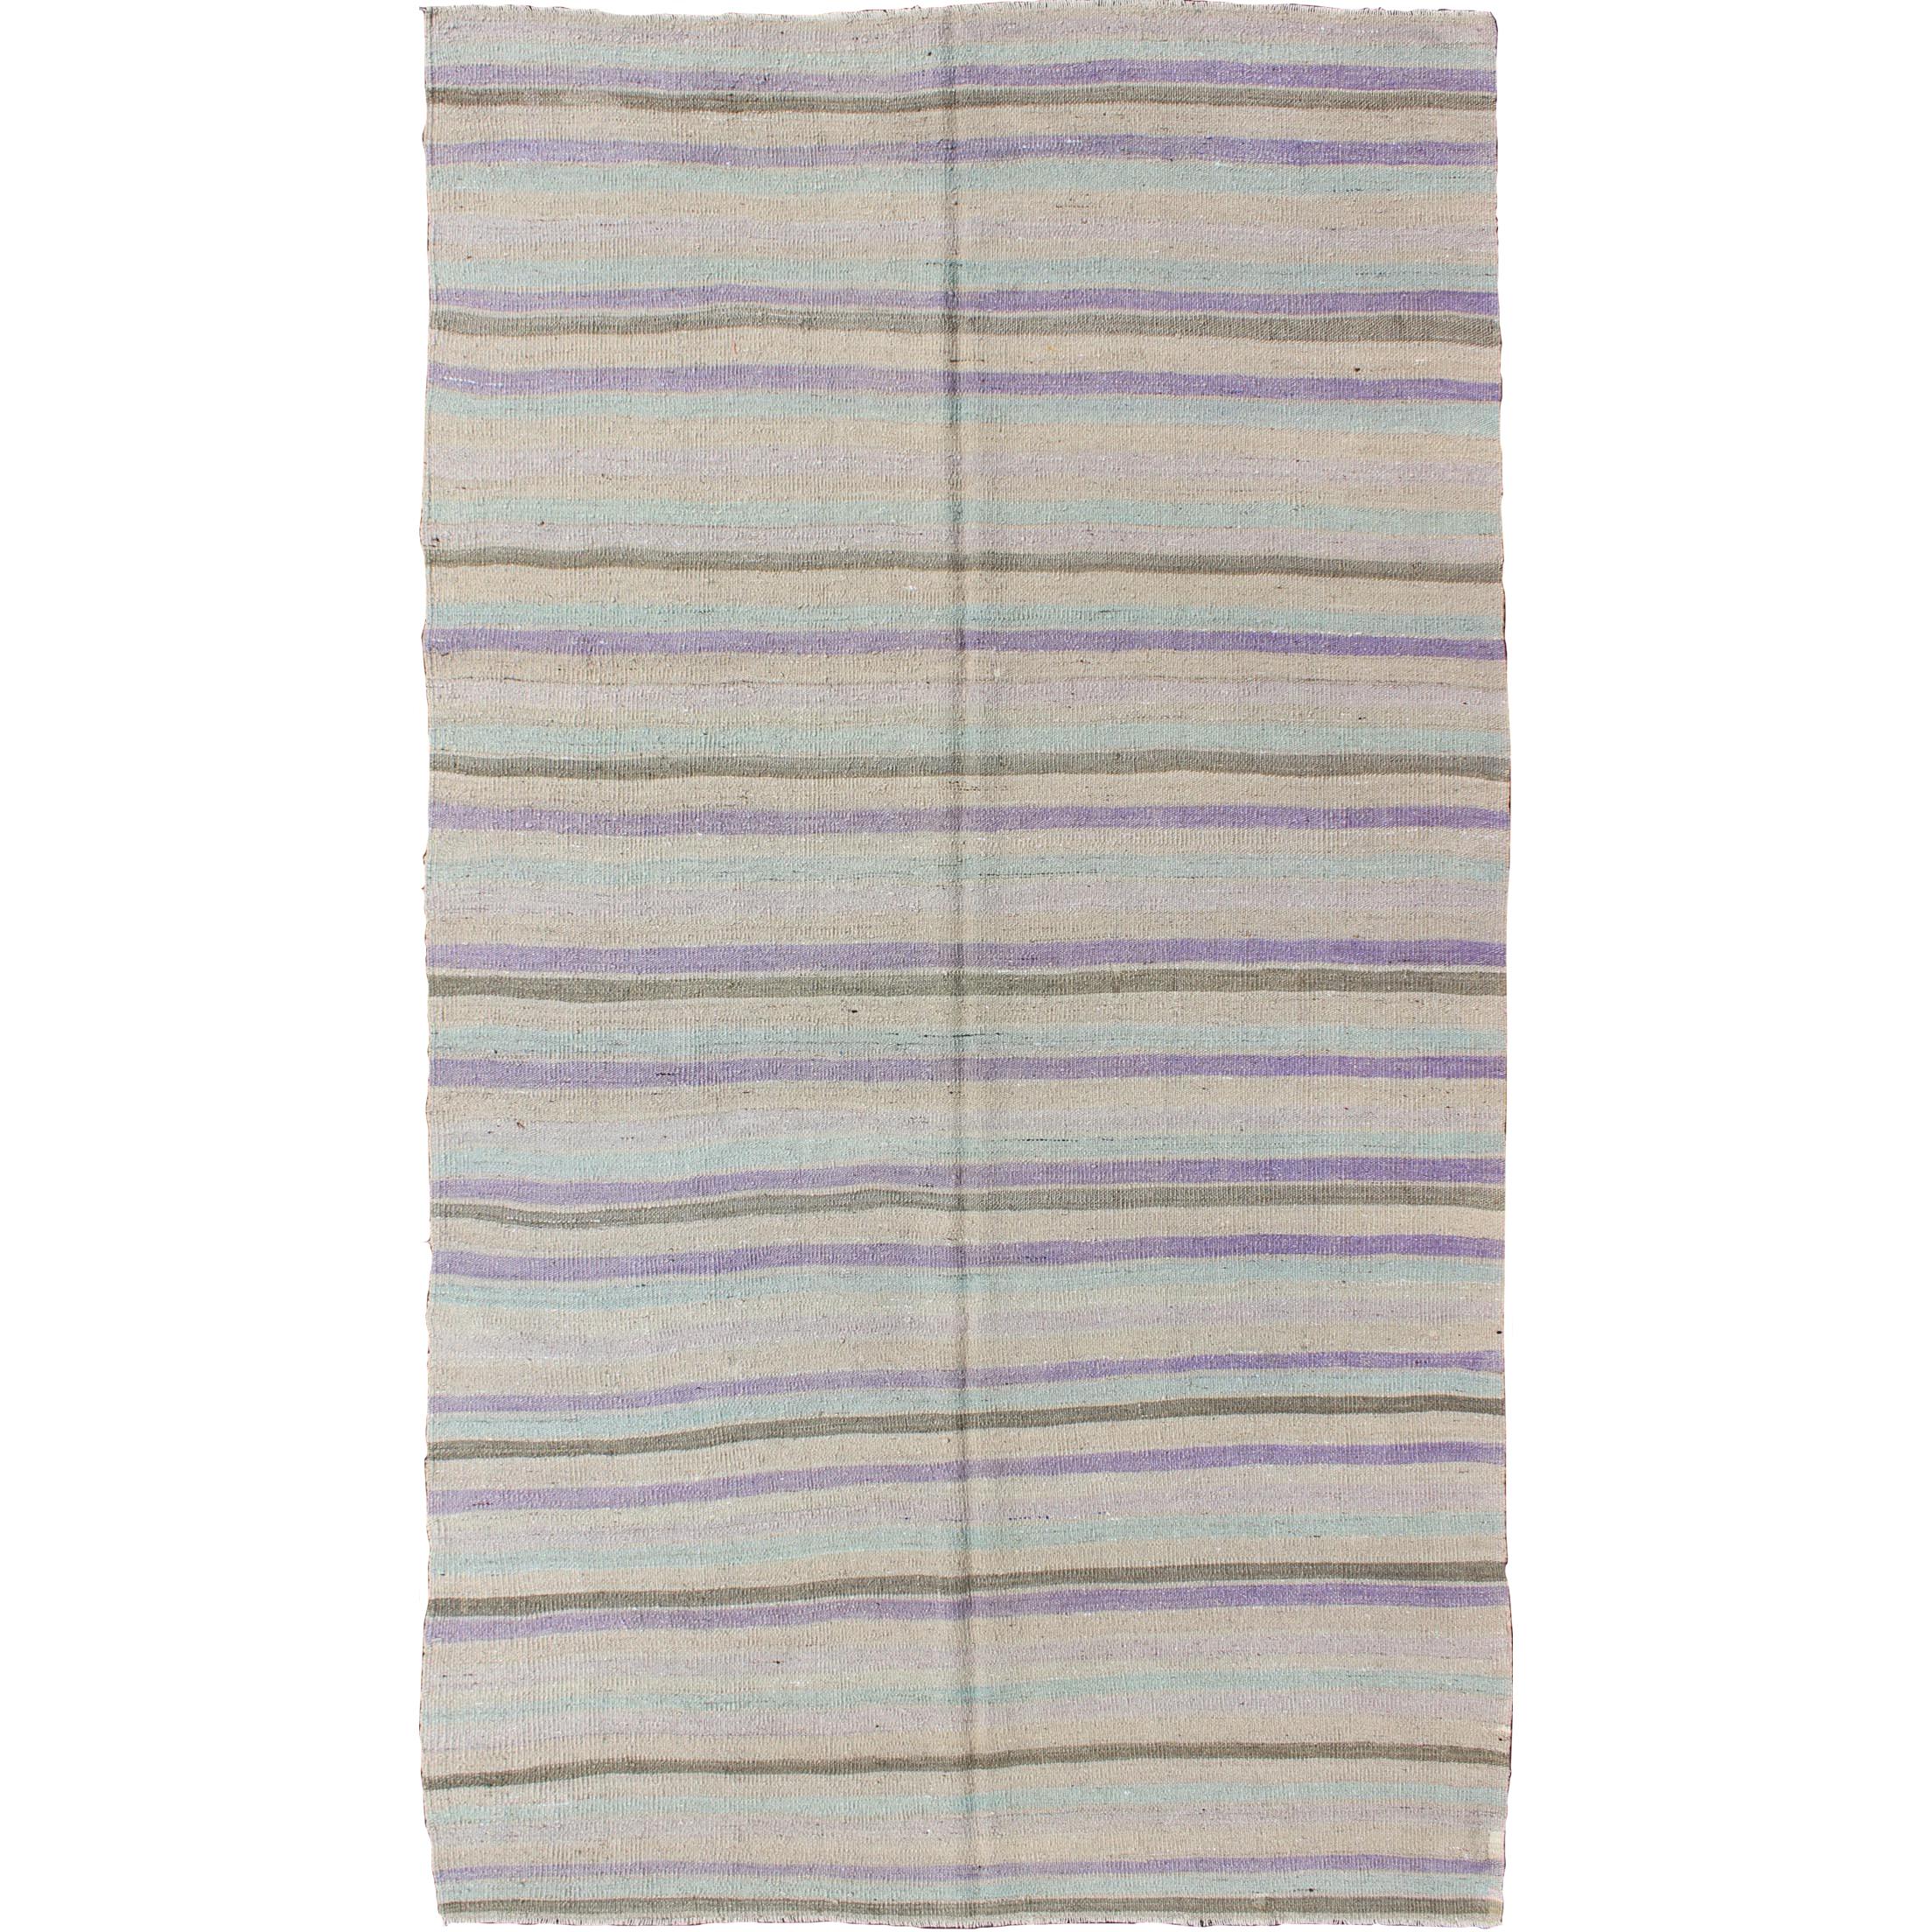 Vintage Turkish Kilim with Stripes in Light Teal, Pastel Purple, Cream and Taupe For Sale